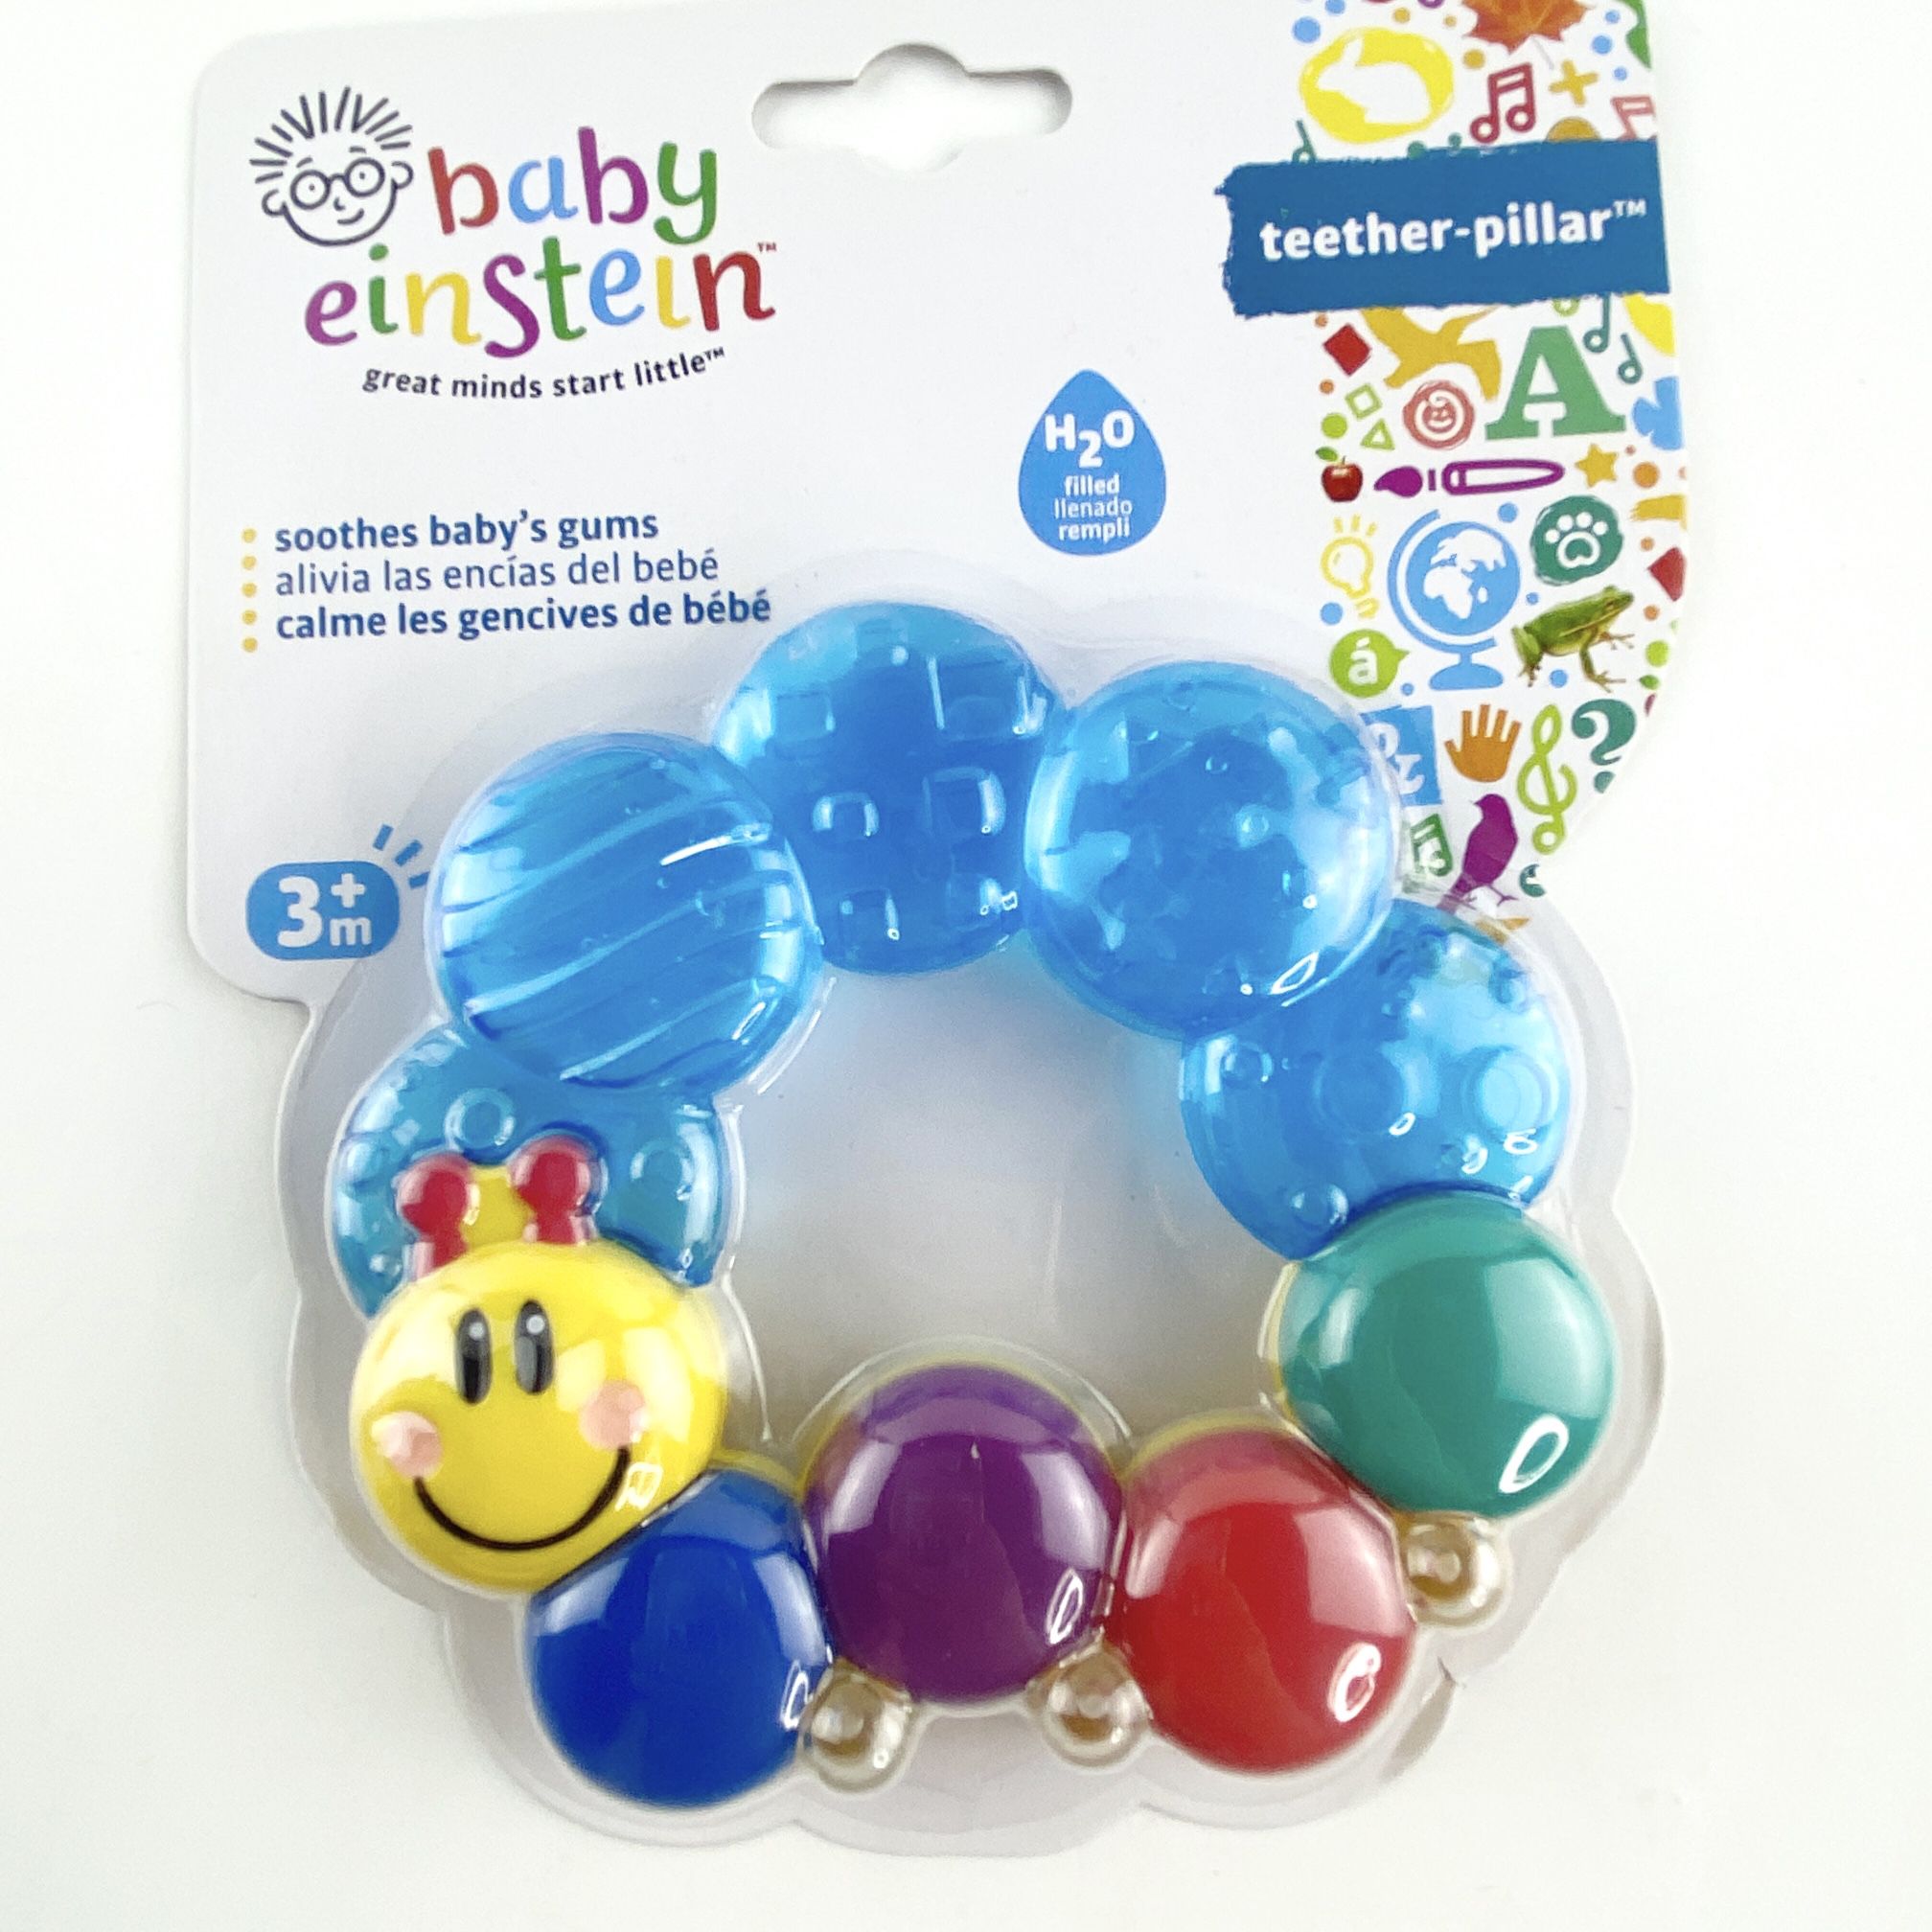 Baby Einstein Colorful Teether-Pillar Rattle  Cool Refrigerated Teething Toy NEW